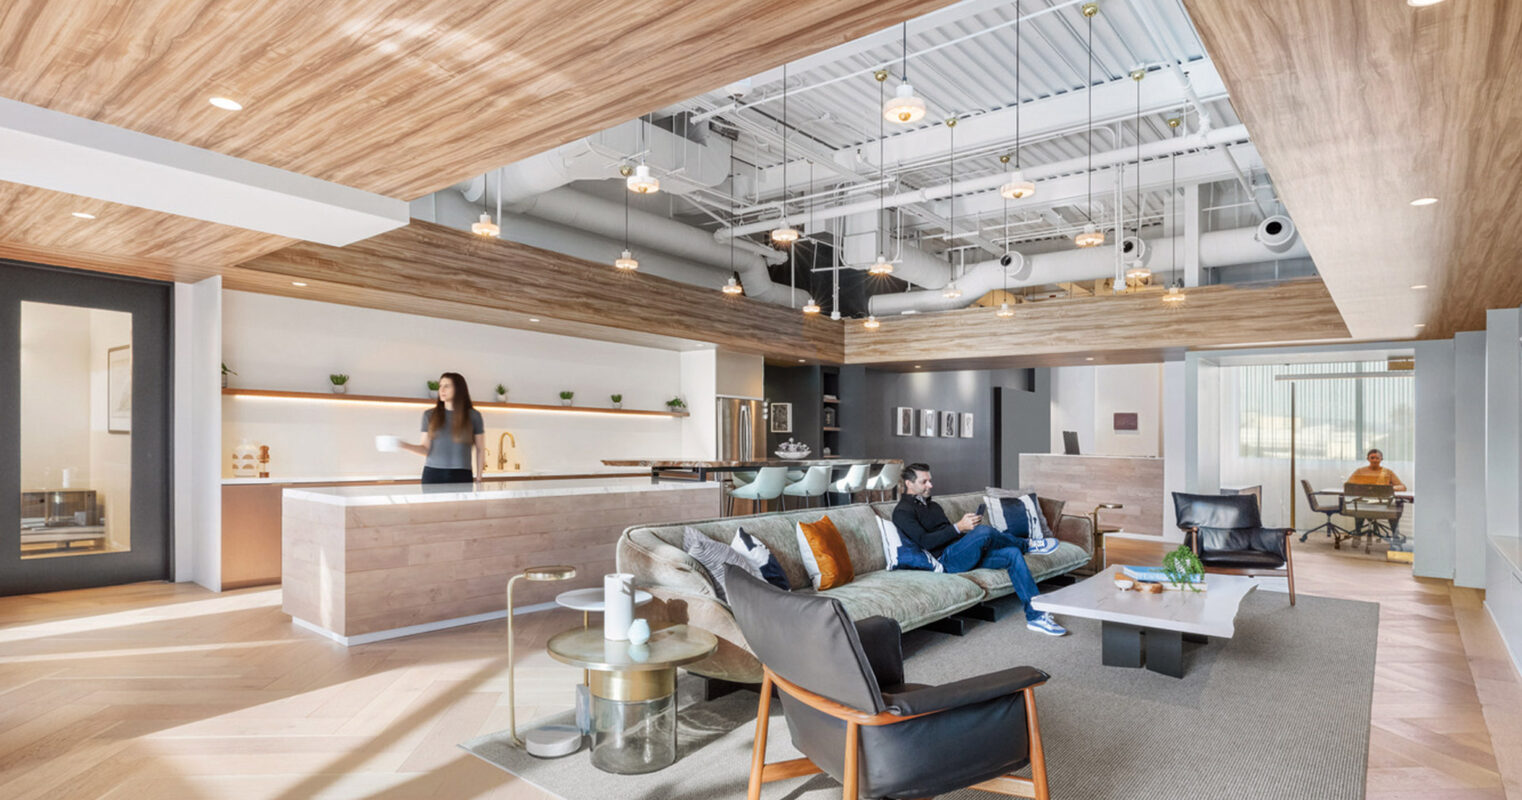 Modern open-plan office lounge with herringbone wood ceiling, polished concrete floor, and central coffee bar. Black leather armchairs, glass-top tables, and subtle beige carpet define the waiting area, with abundant natural light from large windows enhancing the warm, inviting atmosphere.